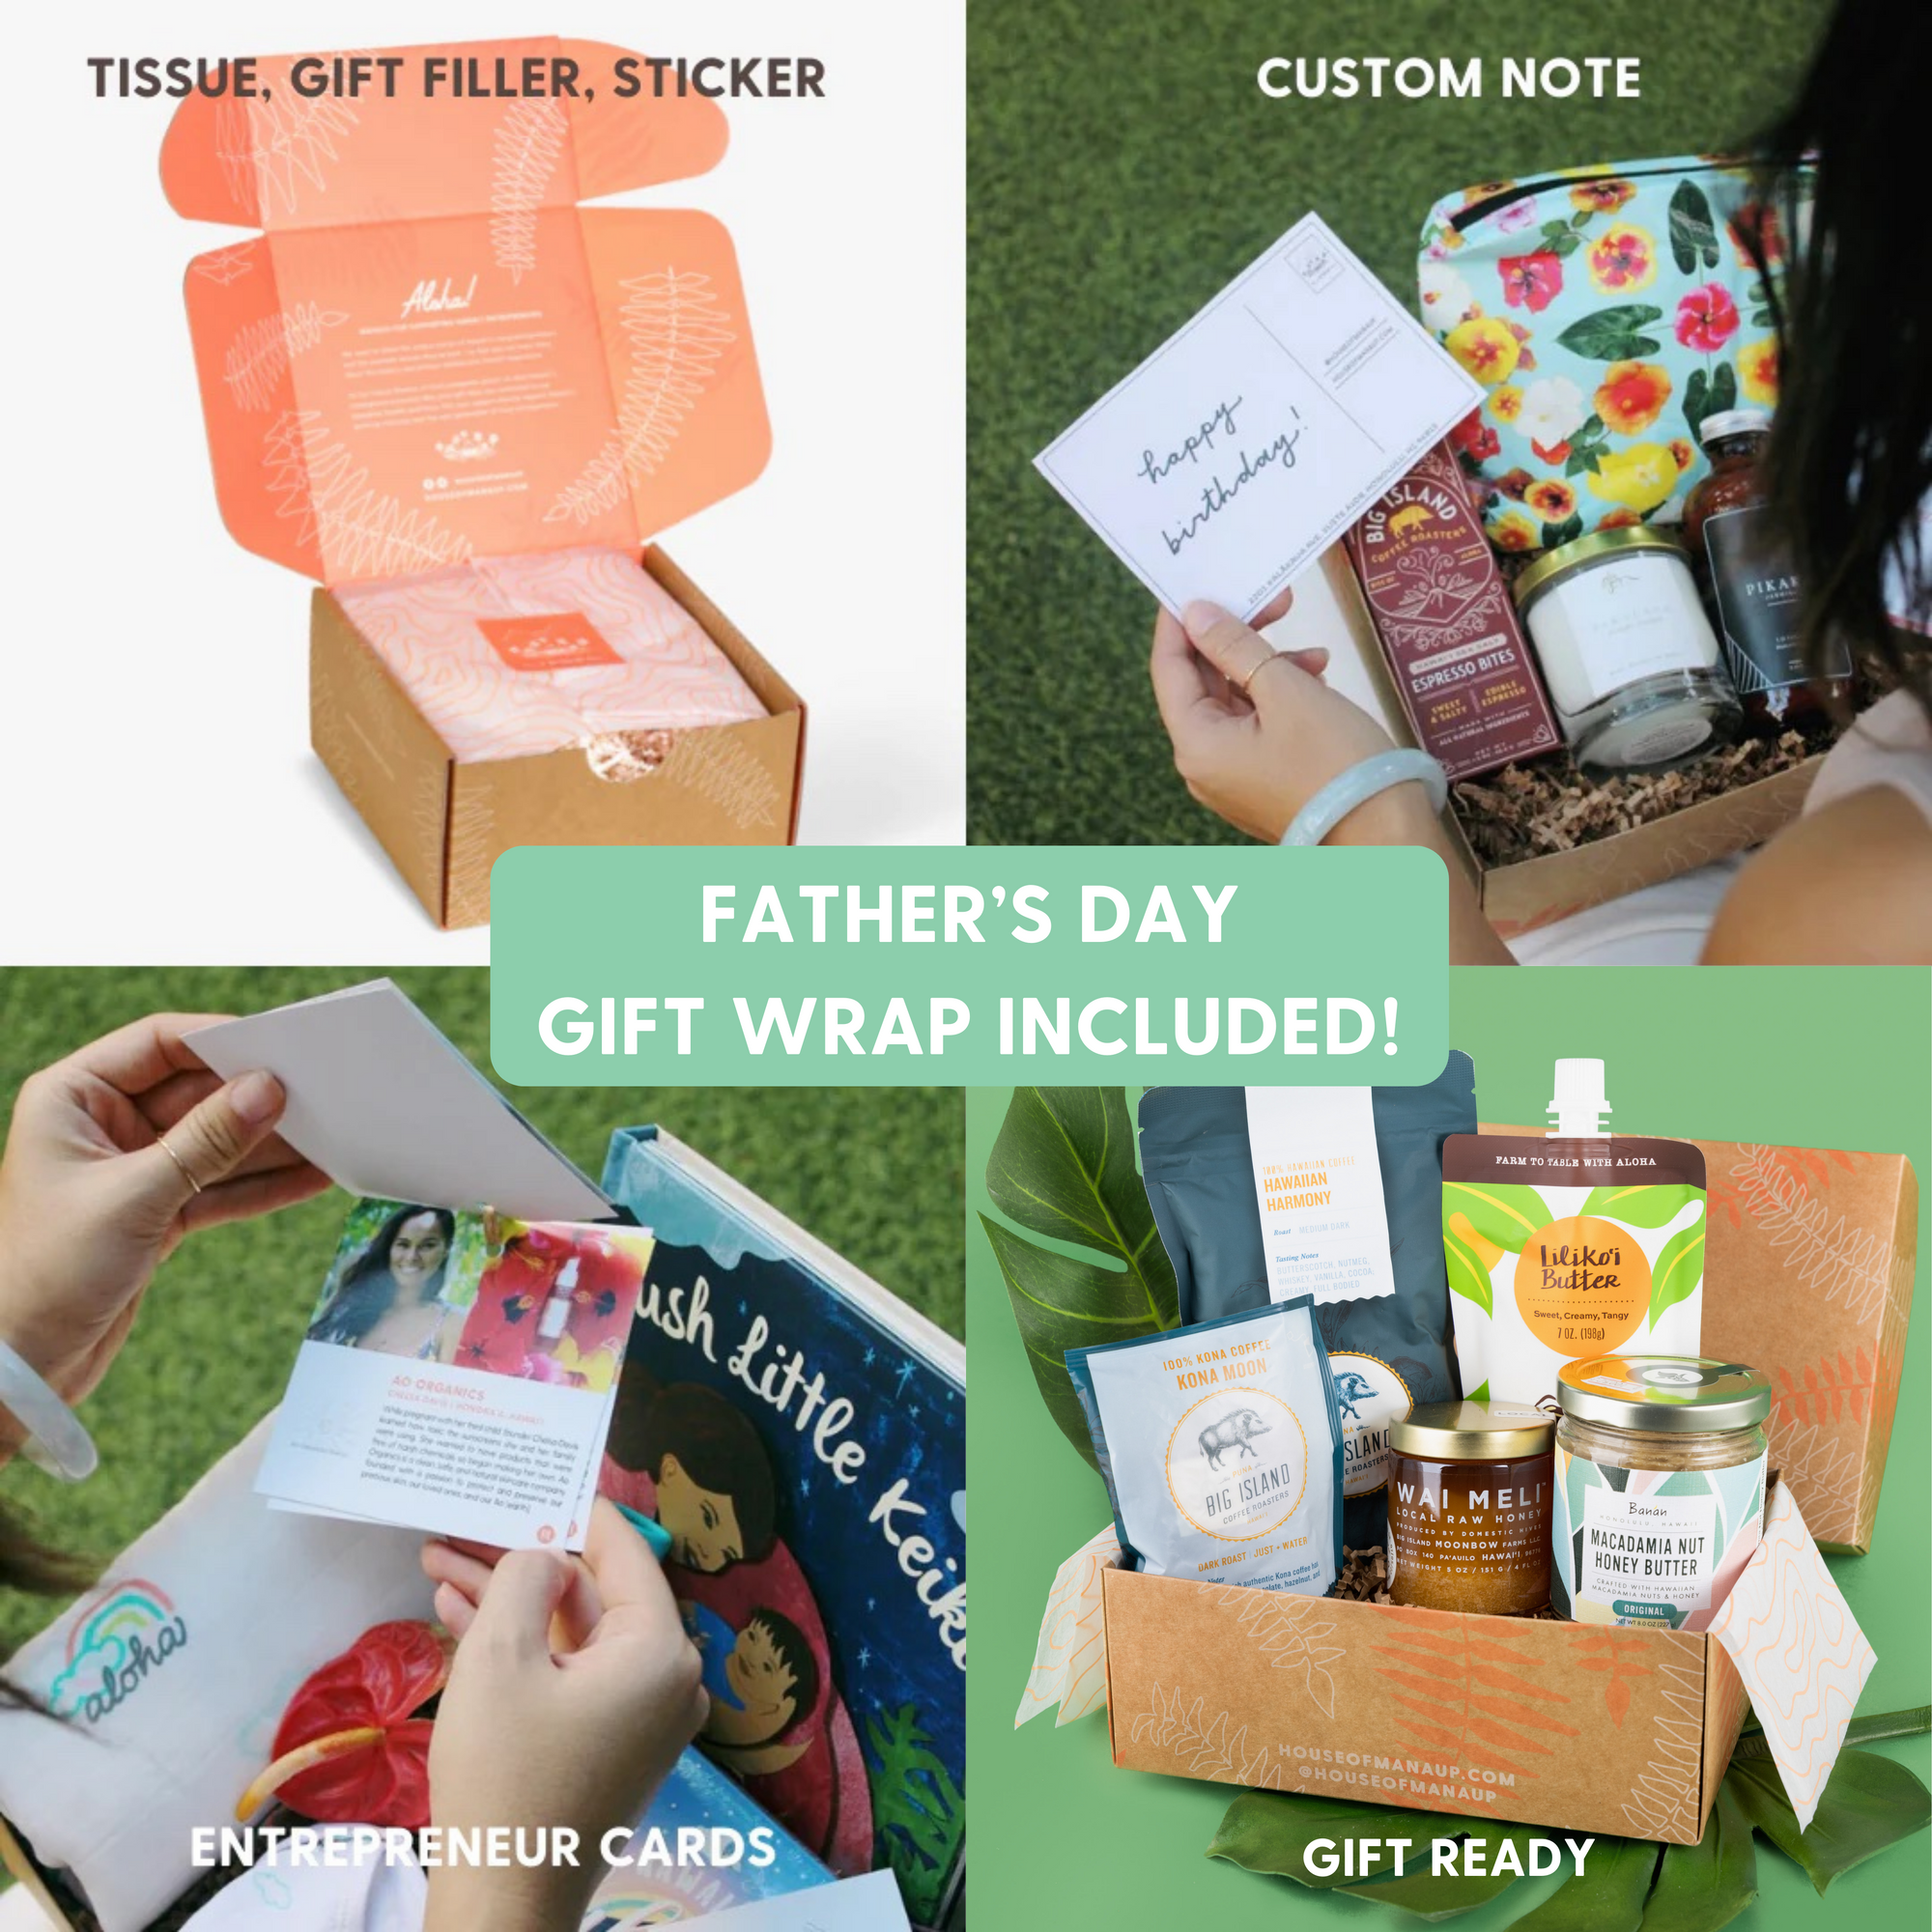 Make this a Father's Day Gift Set